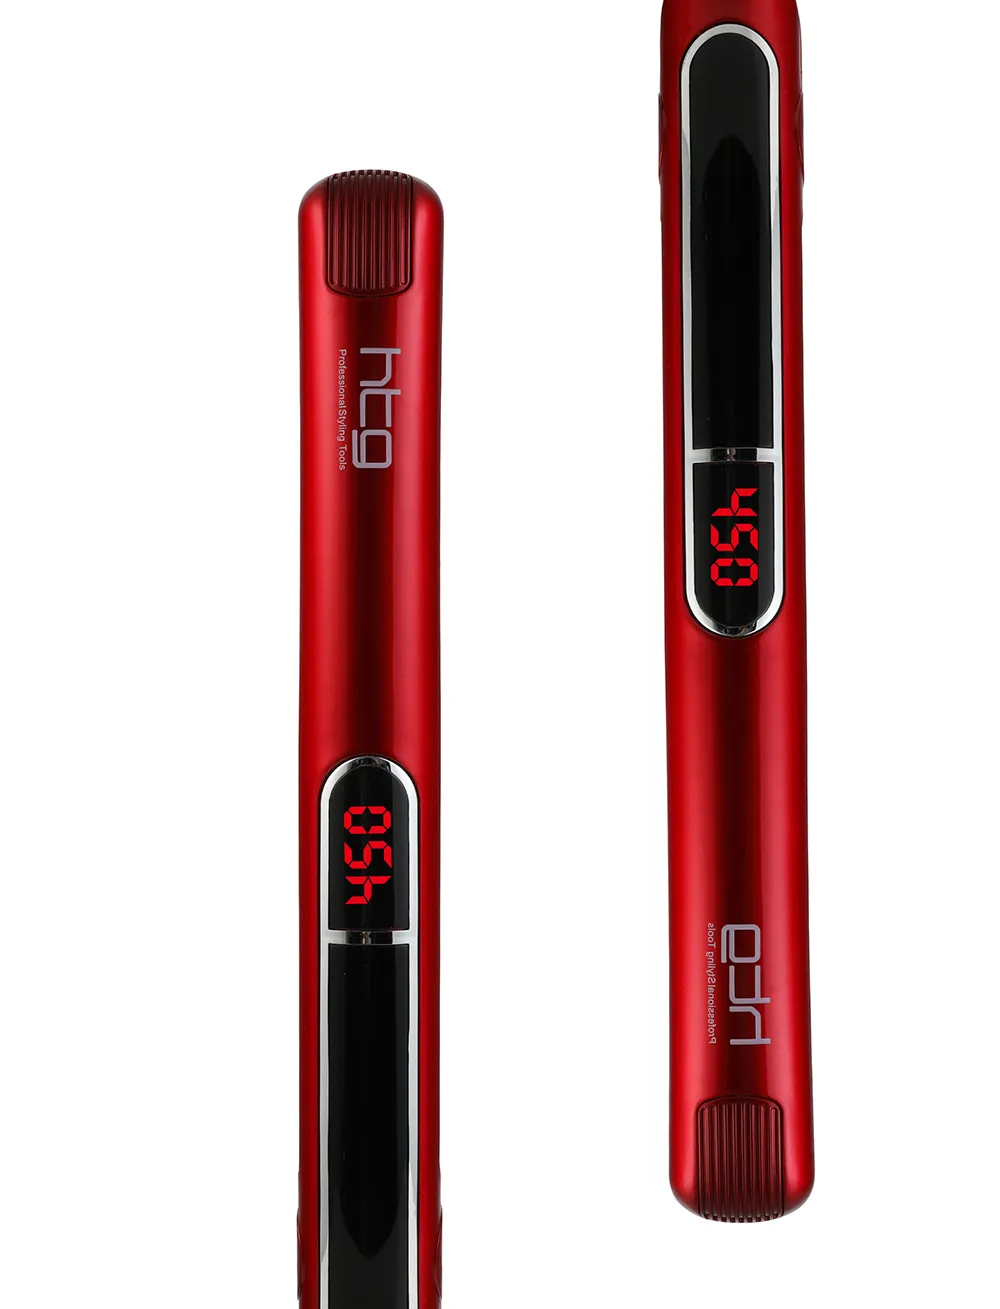 HTG Professional Hair Straightener with lONIC Infrared Hair Straightener Straightening iron LCD Display Hair Flat Iron HT087 CX1786436